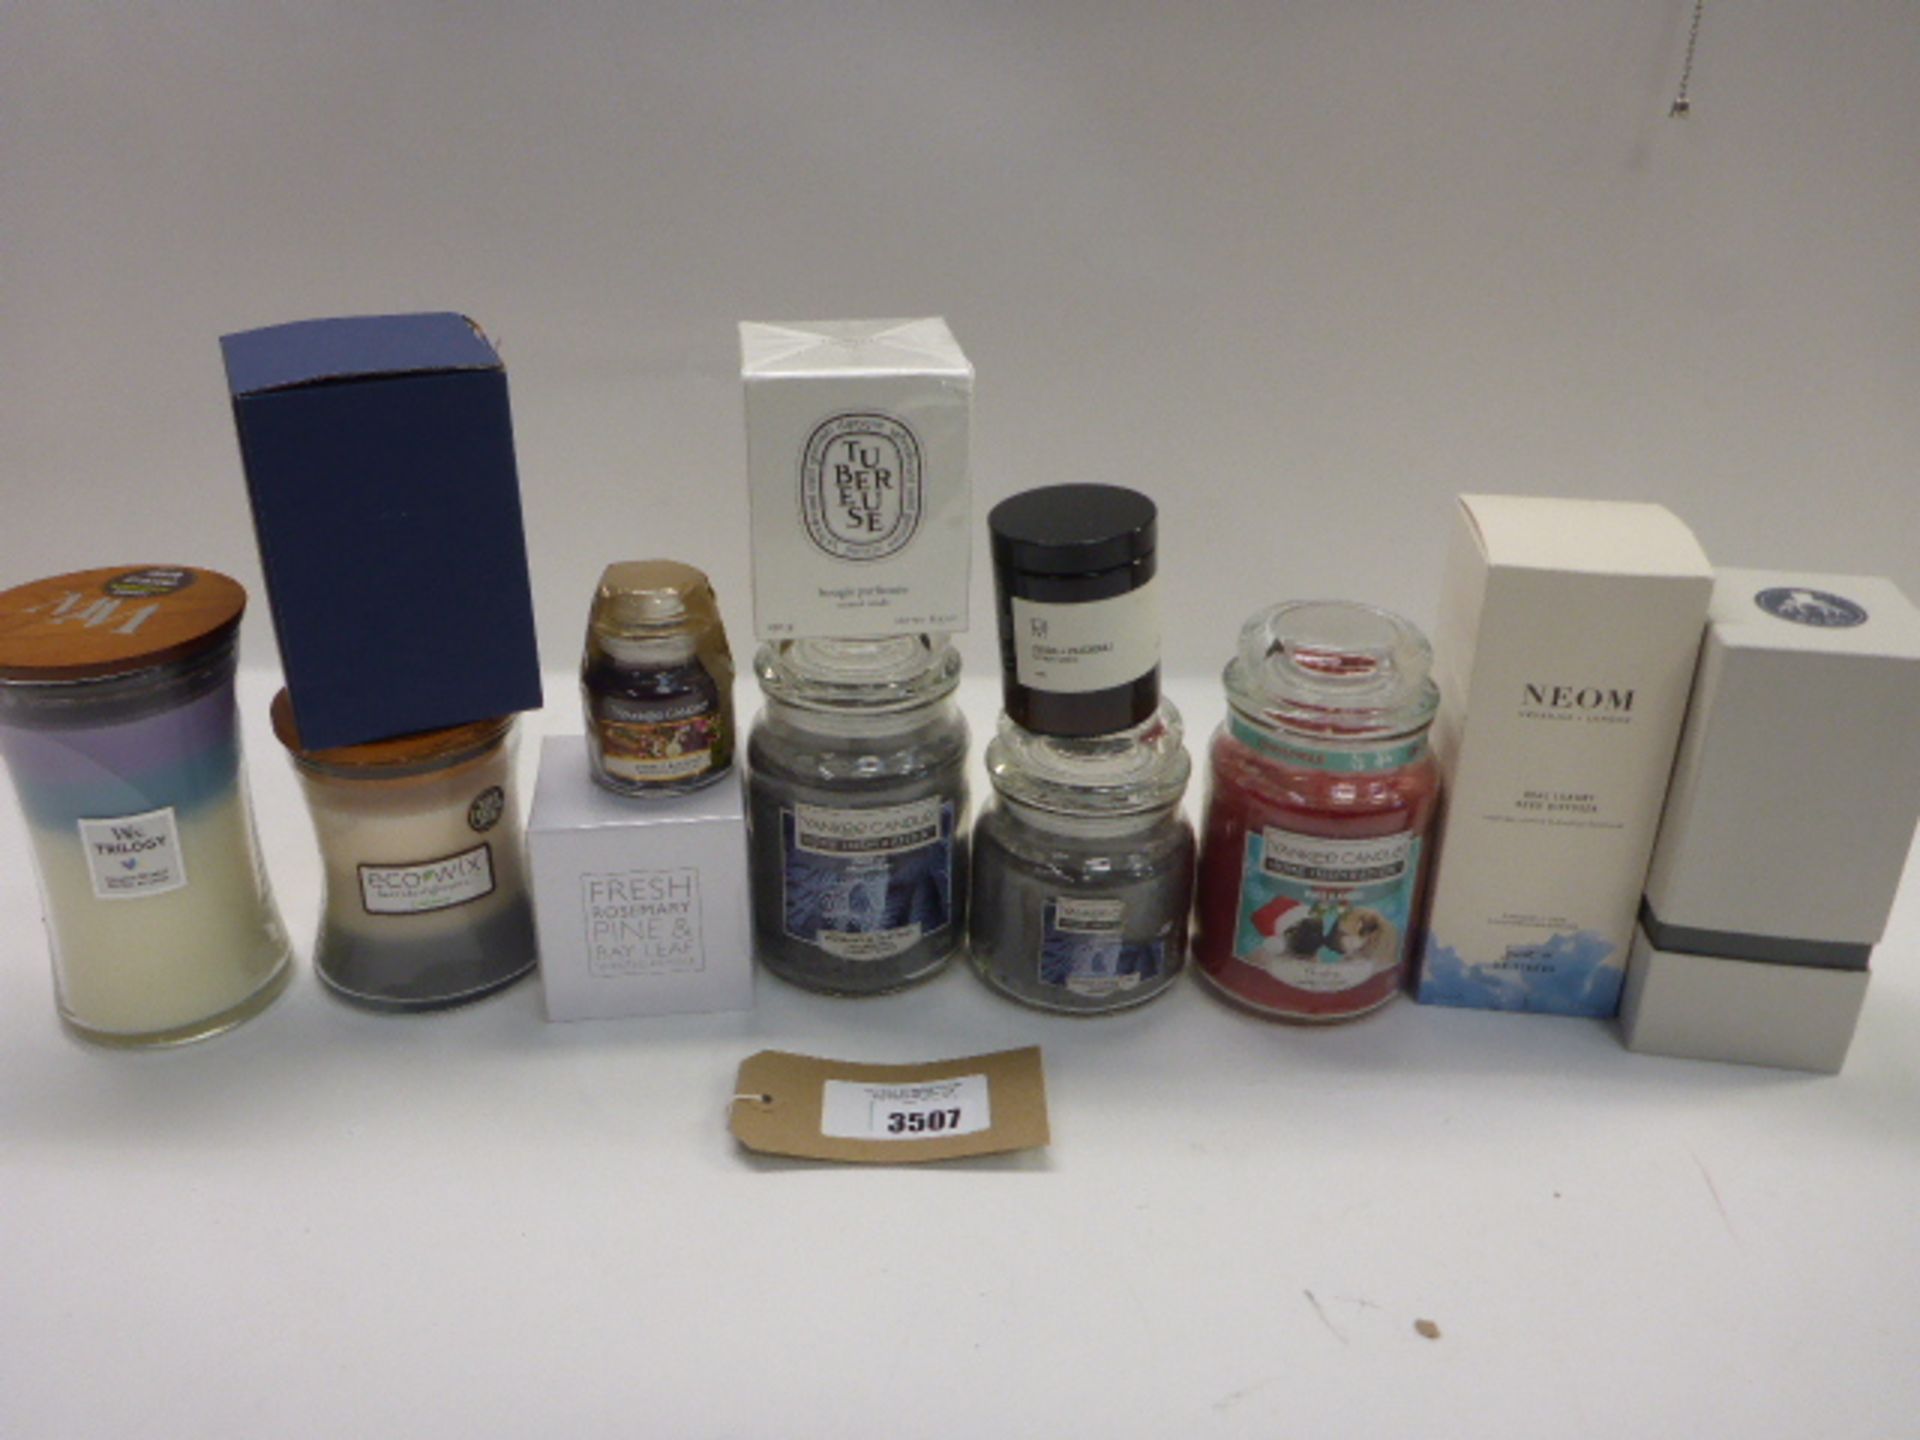 Yankee, The White Co, Diptyque, Trilogy and other scented candles and Neom diffuser